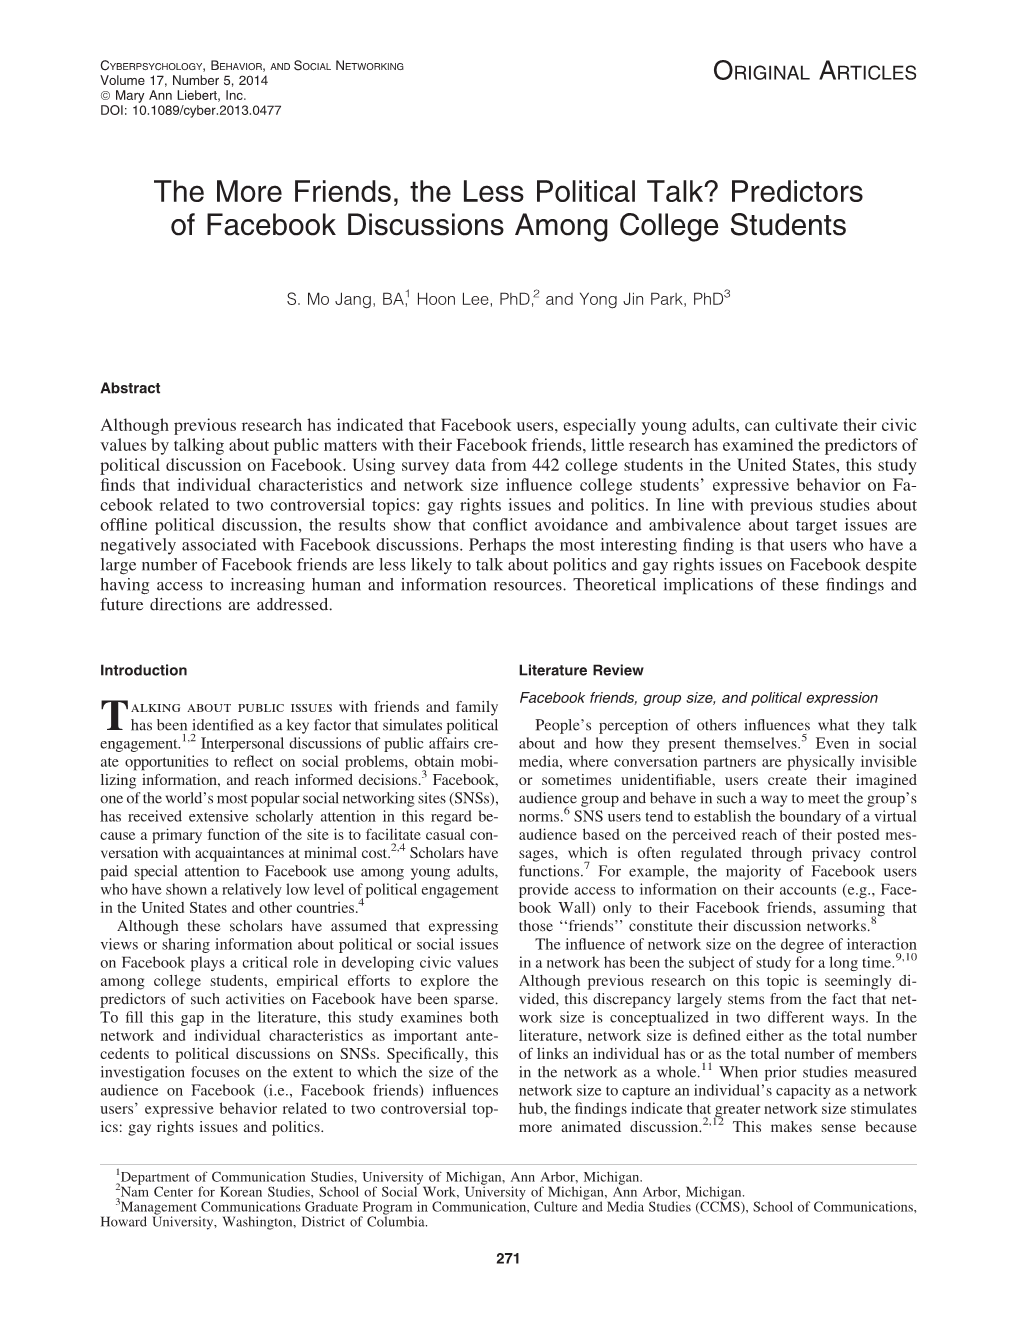 The More Friends, the Less Political Talk? Predictors of Facebook Discussions Among College Students